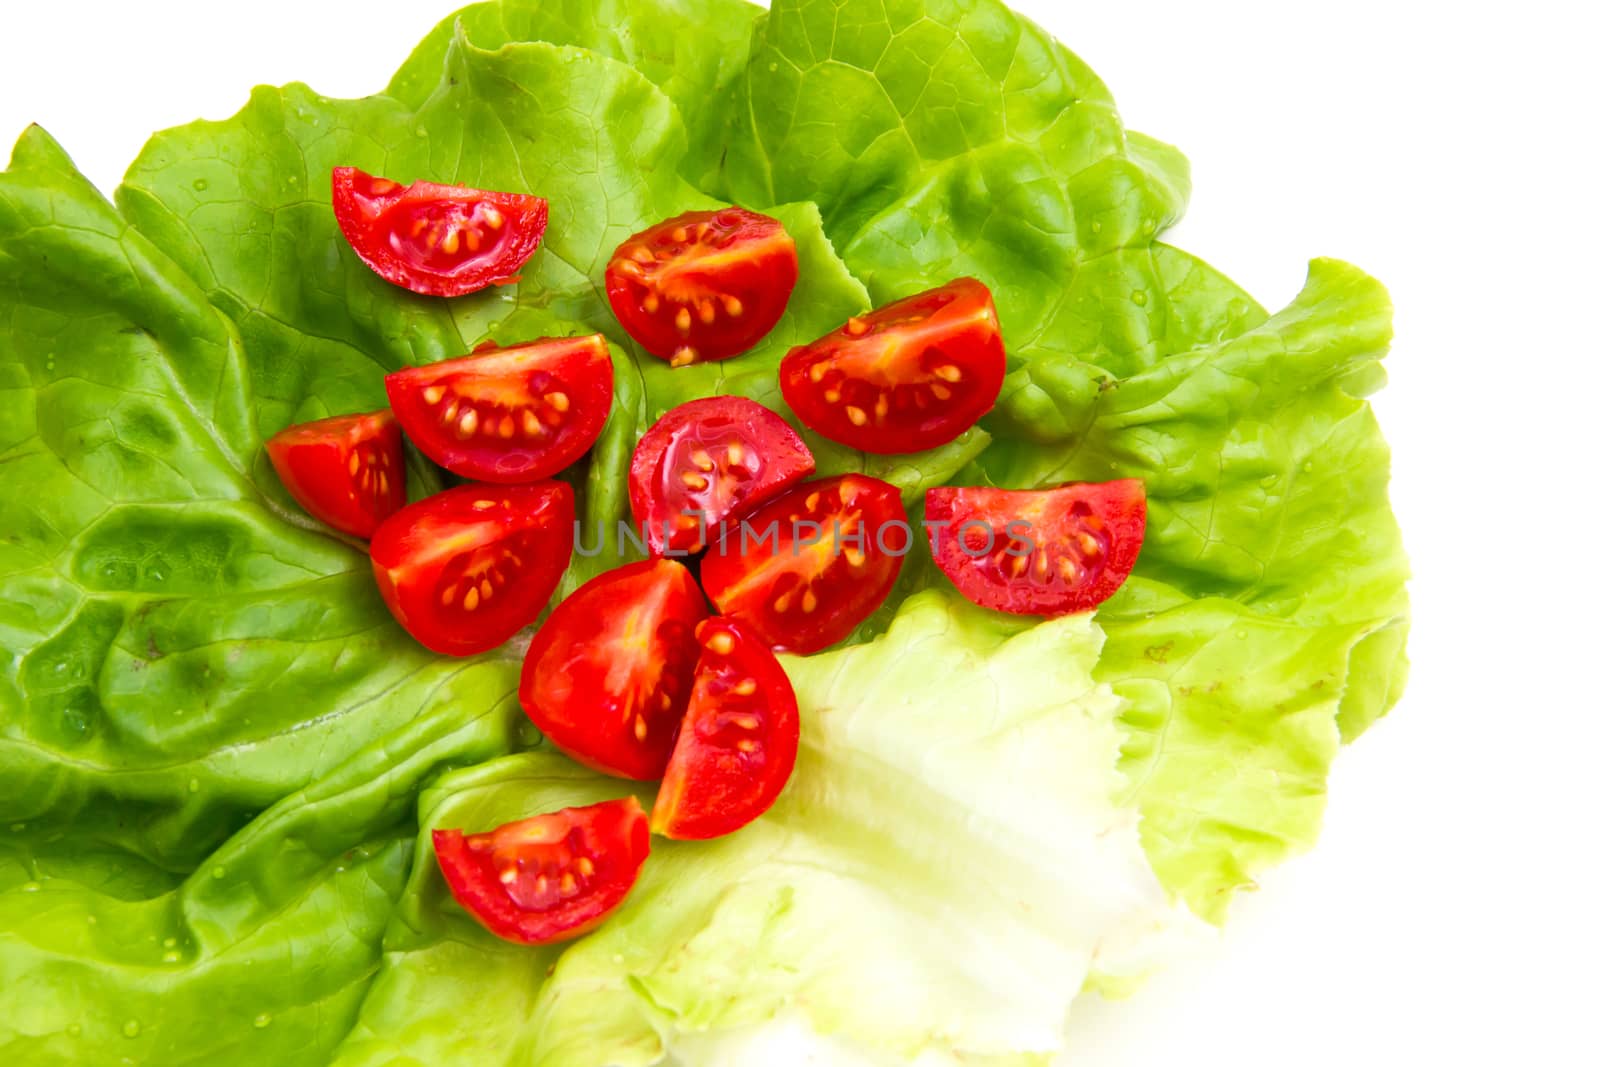 Cherry tomatoes on lettuce on white background close up